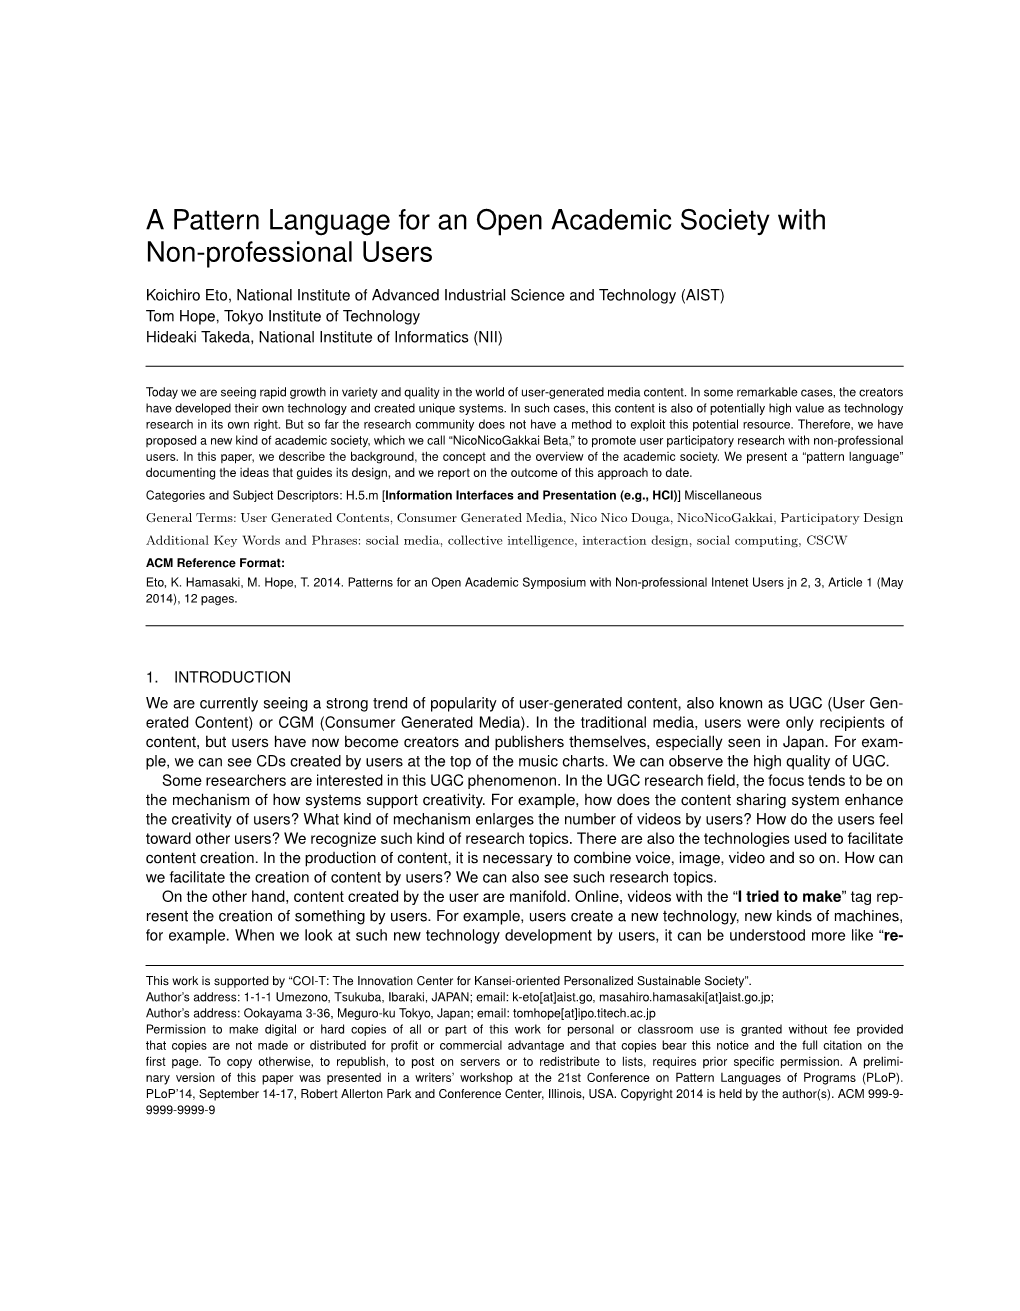 A Pattern Language for an Open Academic Society with Non-Professional Users